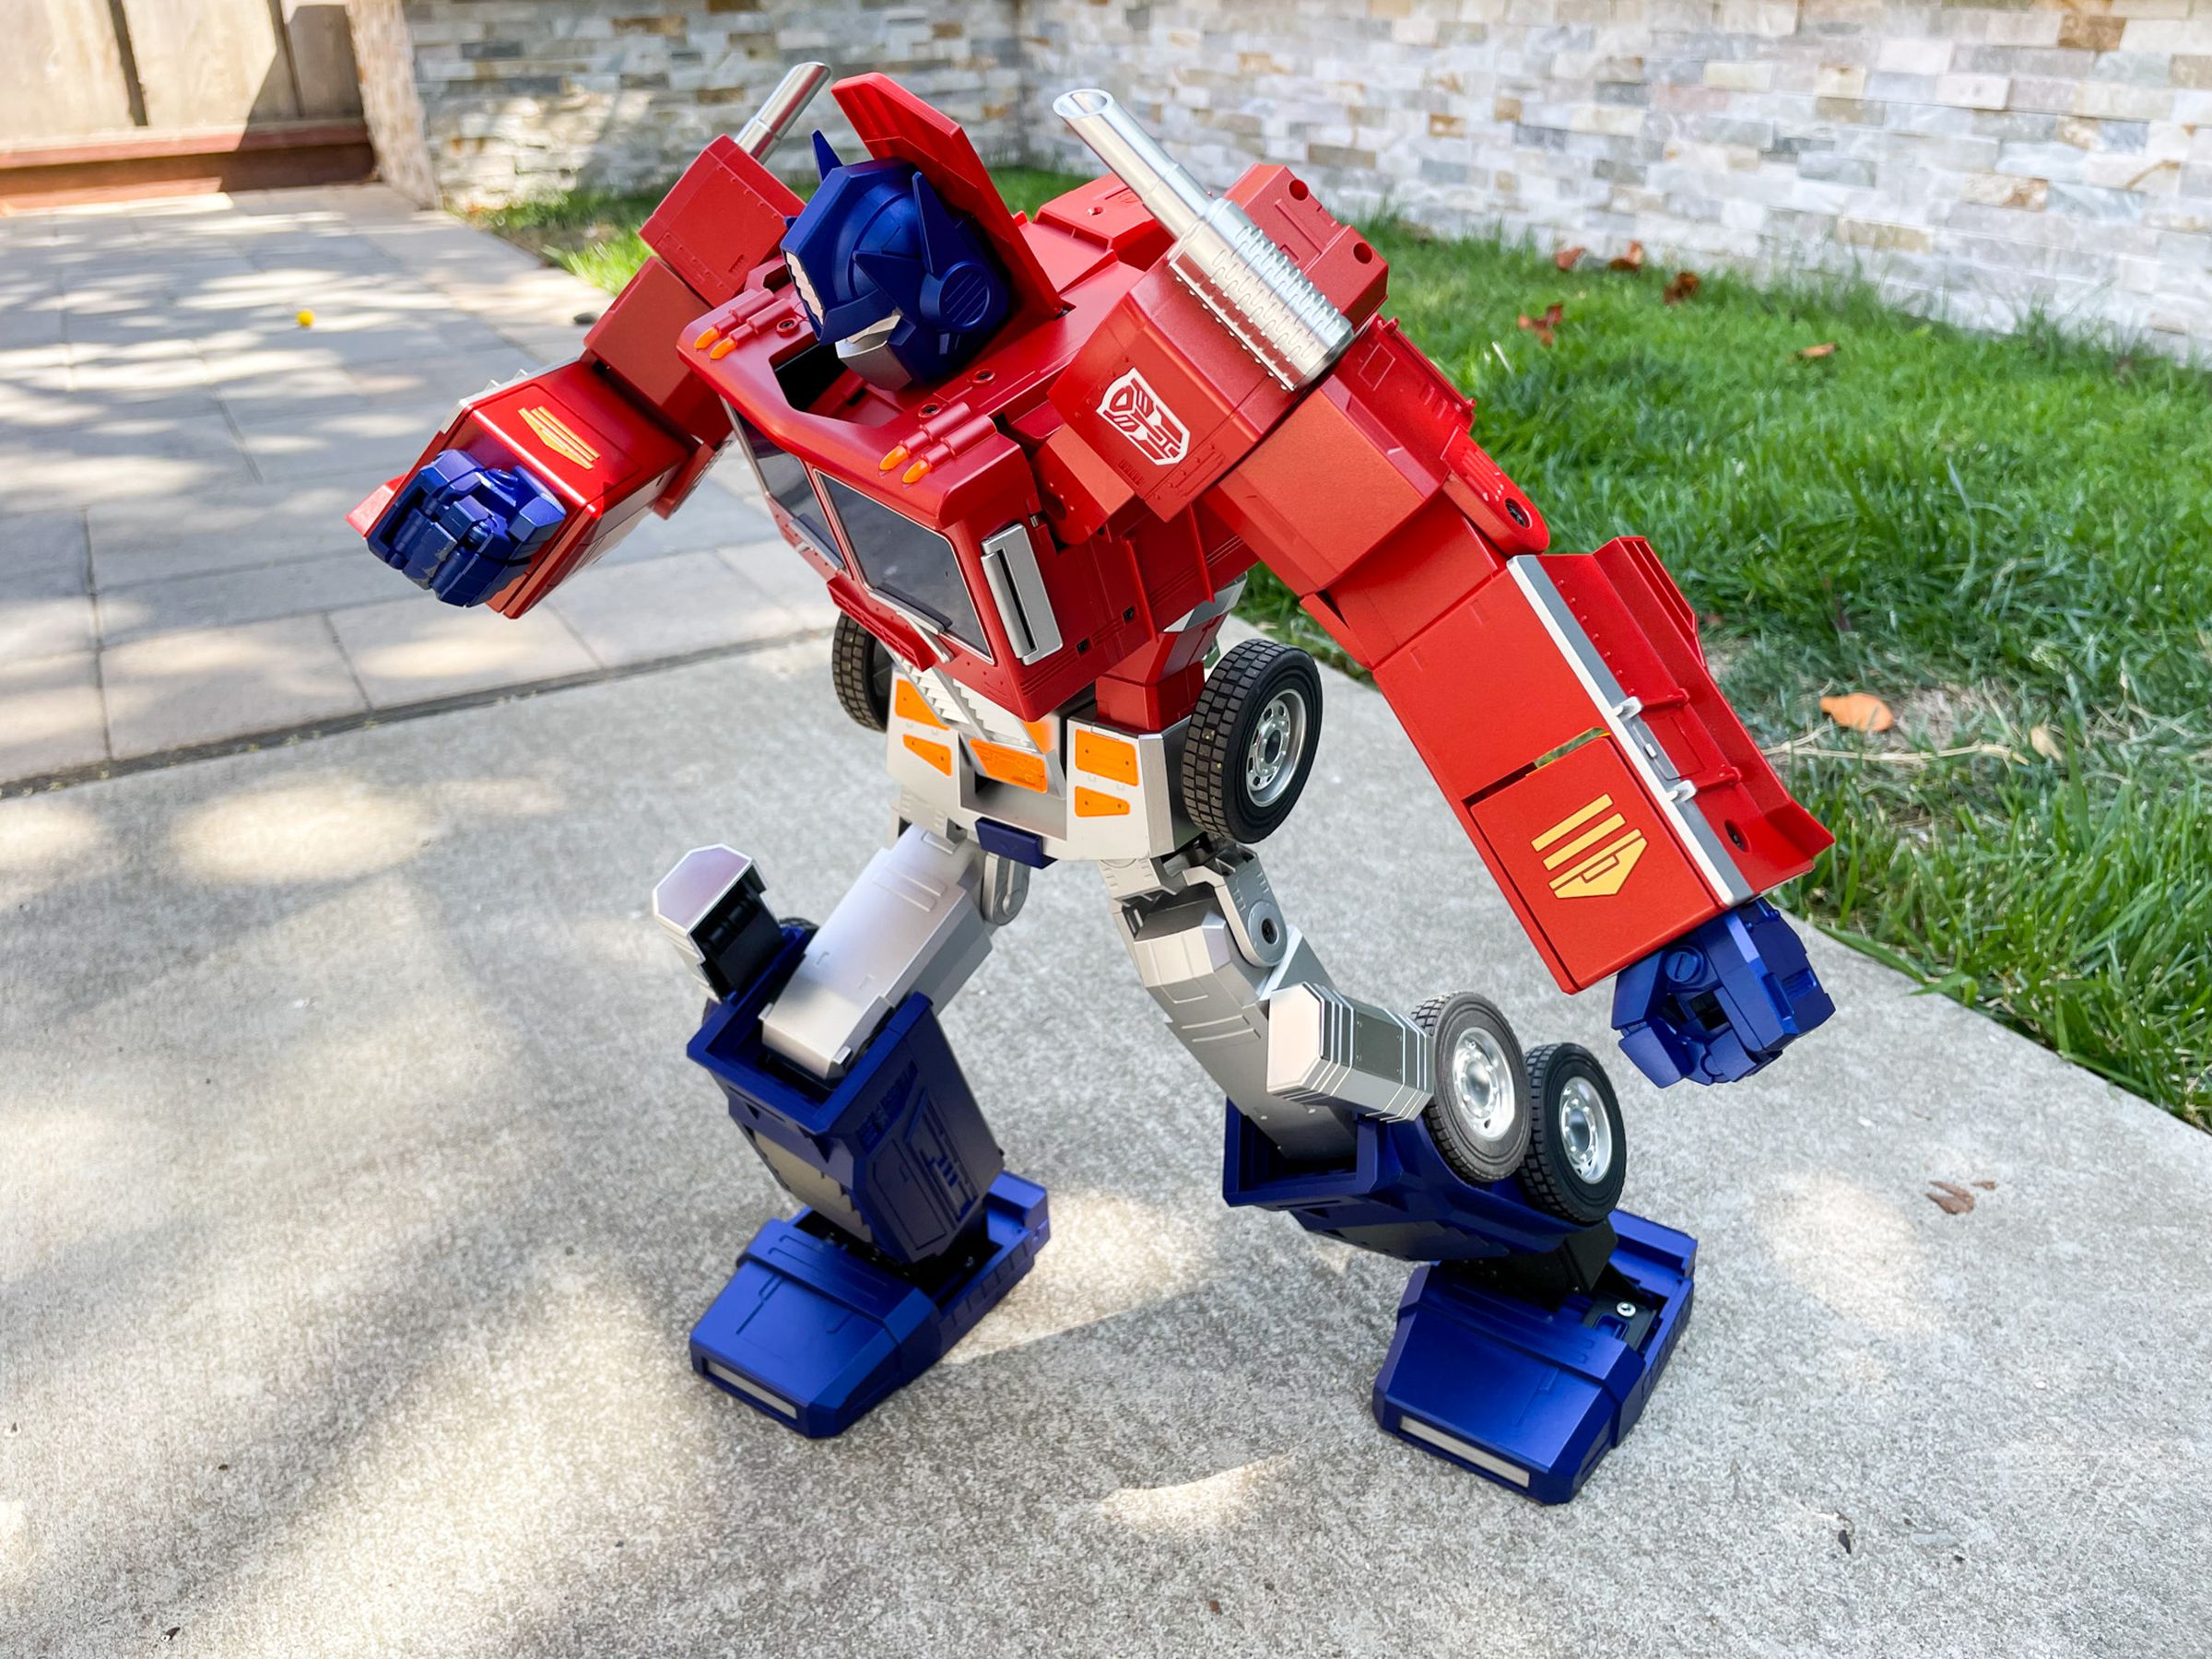 When idle, Optimus tends to dab. Seriously, this is one of his idle poses that he’ll do automatically.